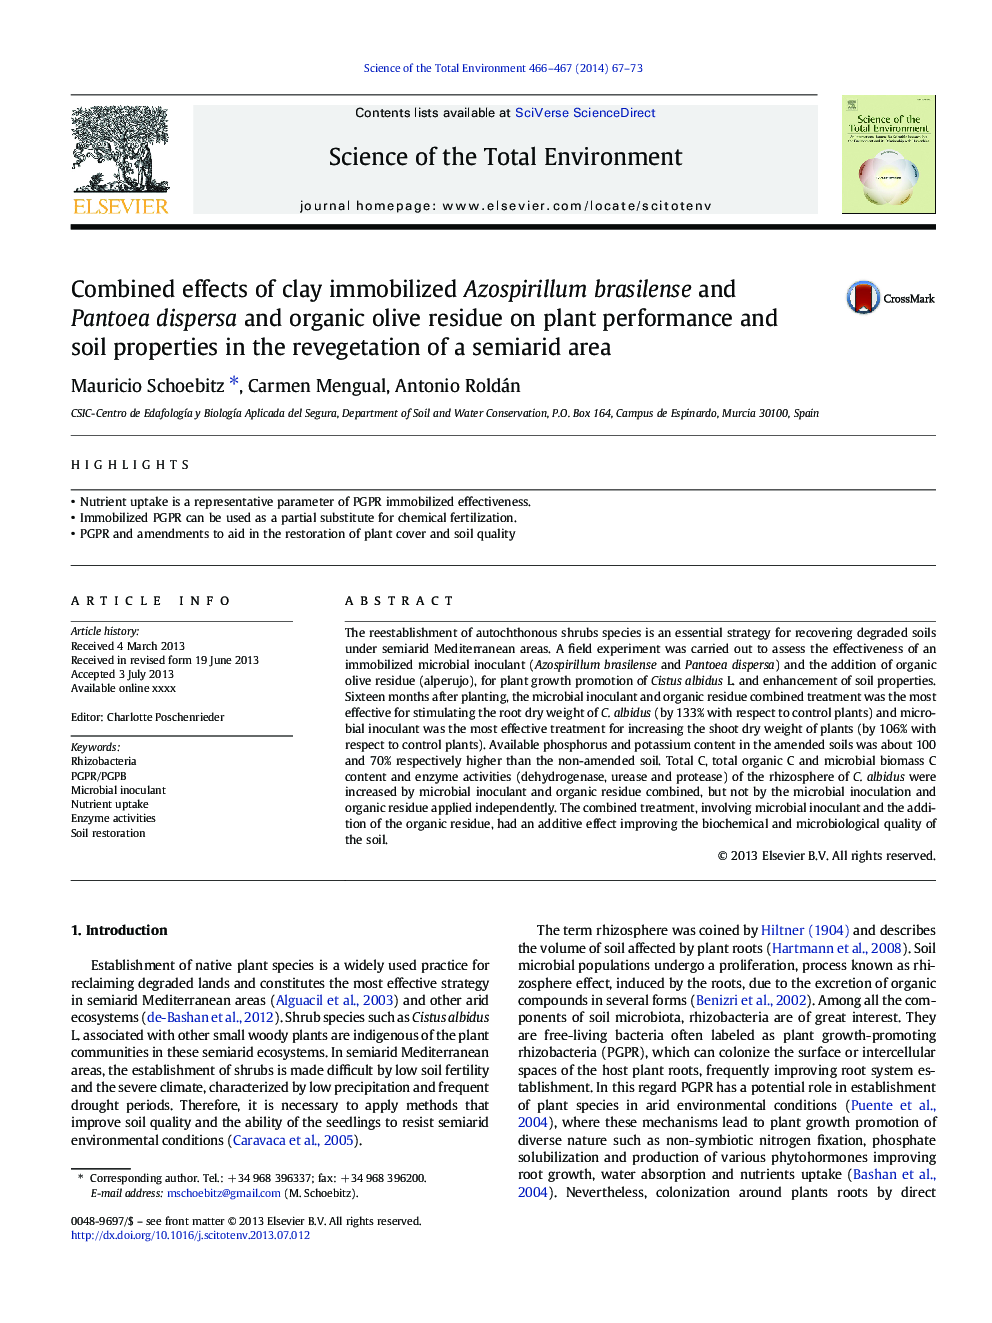 Combined effects of clay immobilized Azospirillum brasilense and Pantoea dispersa and organic olive residue on plant performance and soil properties in the revegetation of a semiarid area